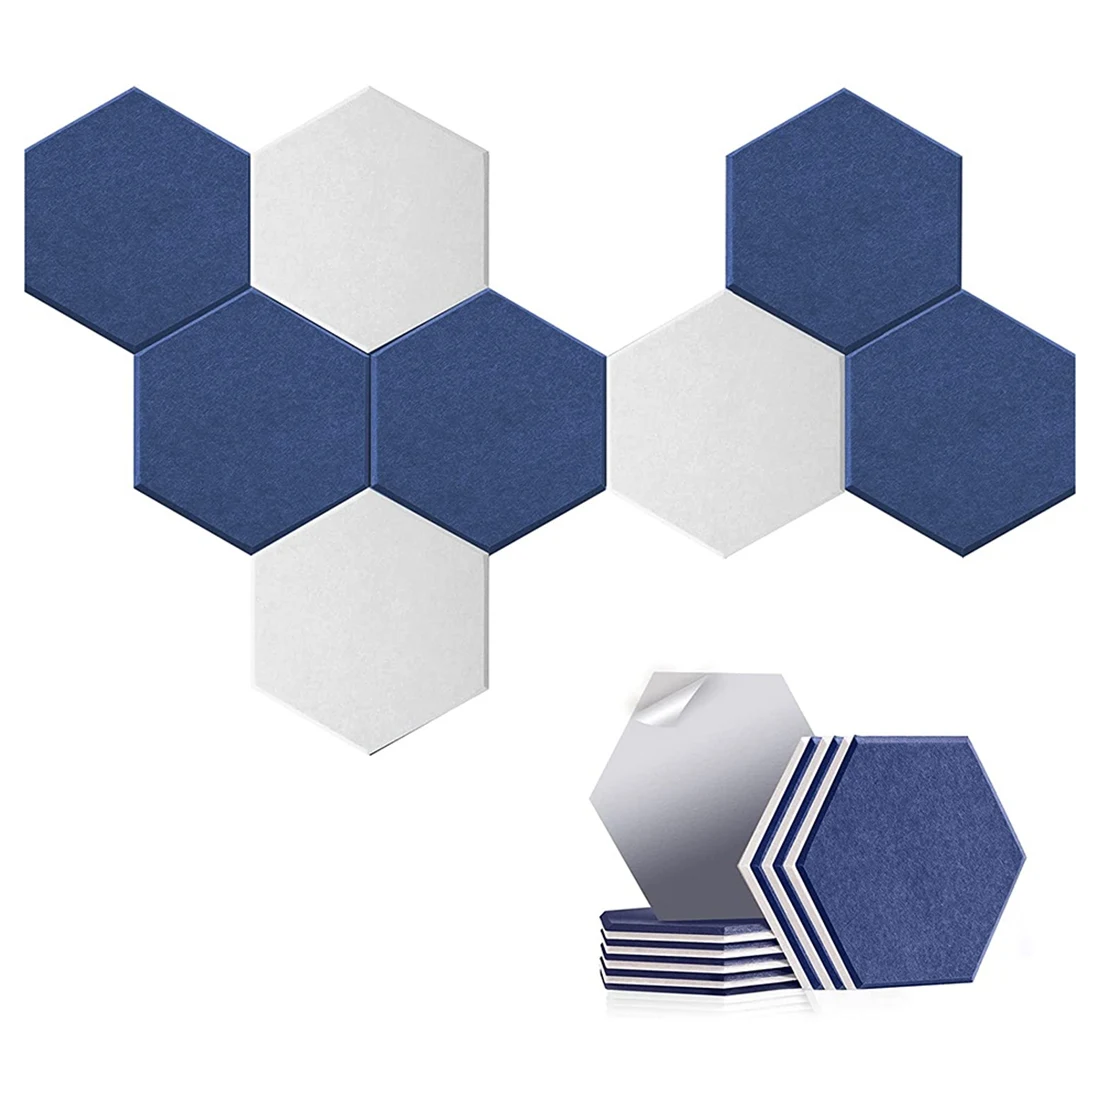 

16 Pack Hexagon Acoustic Panels,Soundproof Wall Panels,Soundproofing Absorption Panel,Acoustic Treatment for Studio,Etc